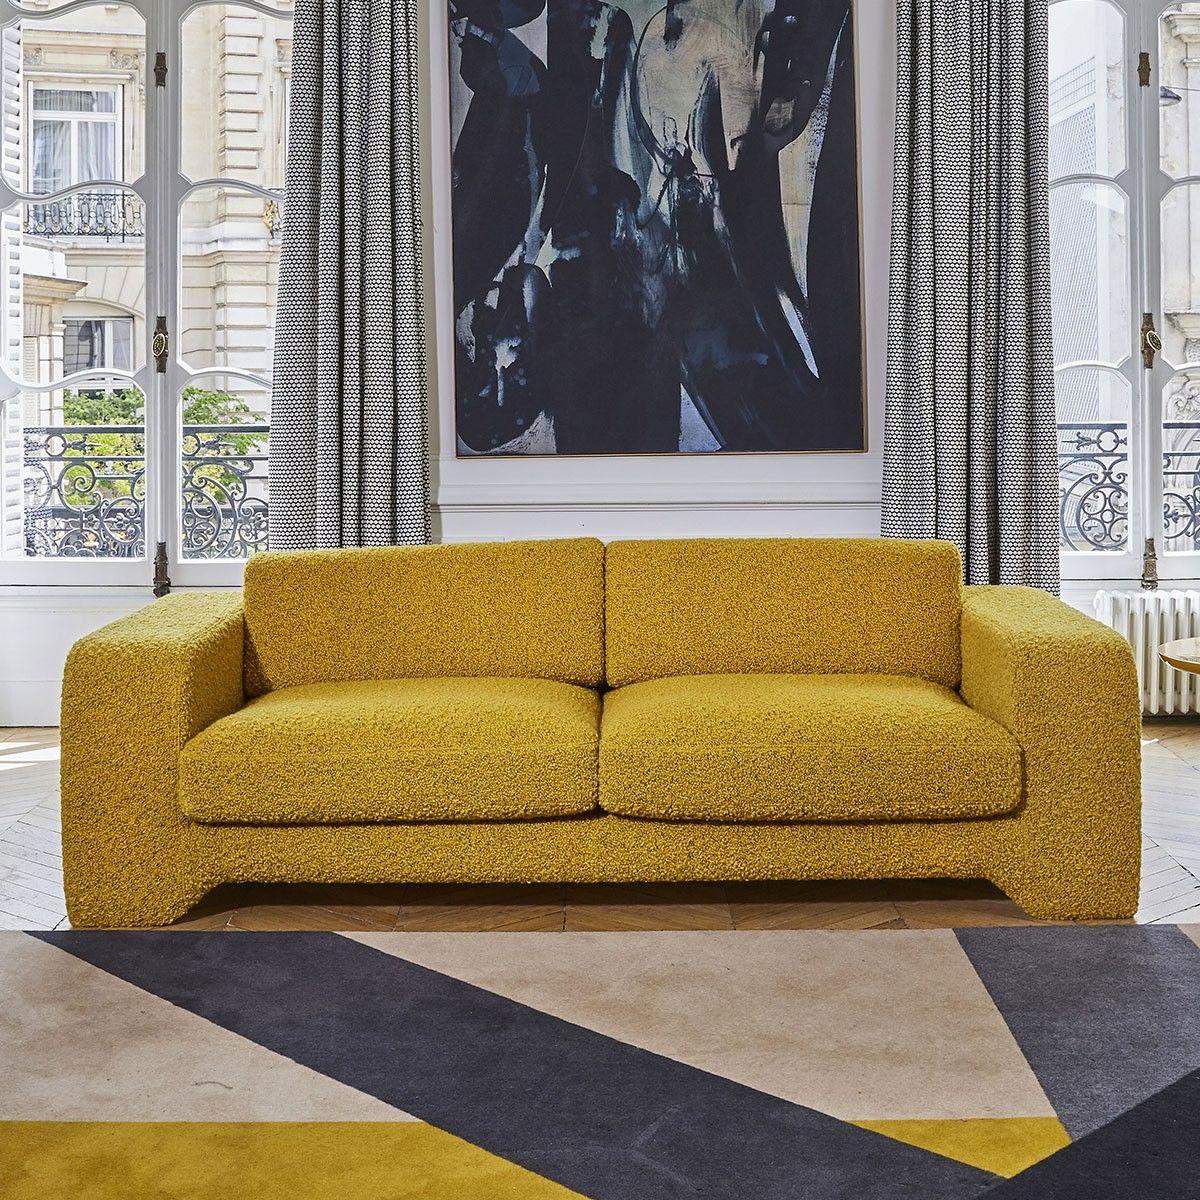 Popus Editions Giovanna 4 seater sofa in Curry Cork Linen Upholstery

Giovanna is a sofa with a strong profile. A sober, plush line, with this famous detail that changes everything, so as not to forget its strength of character and this charming